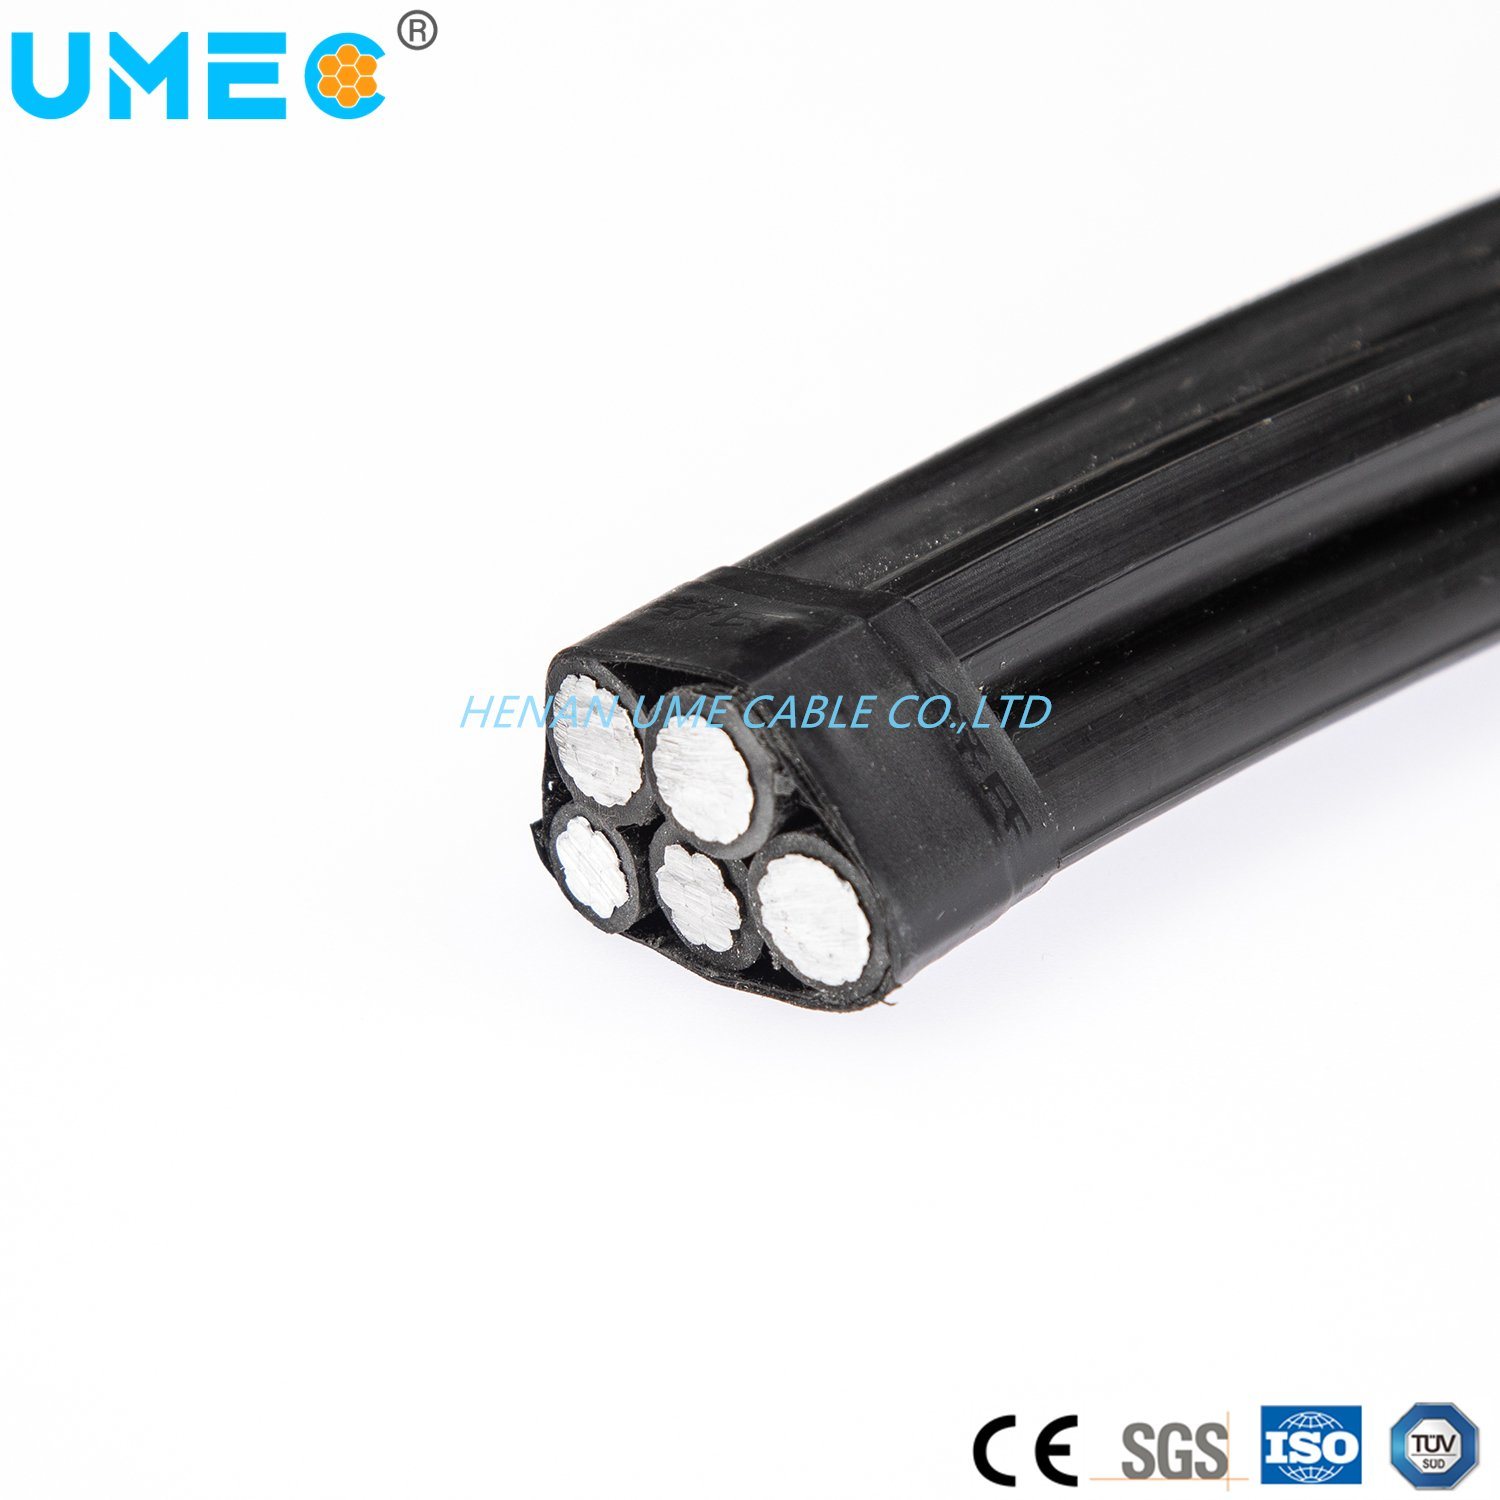 2X16+ND25mm2 2X35+16mm2 Complete Cable 5 Strands Aluminum Conductor Caai Cable/Self-Supporting